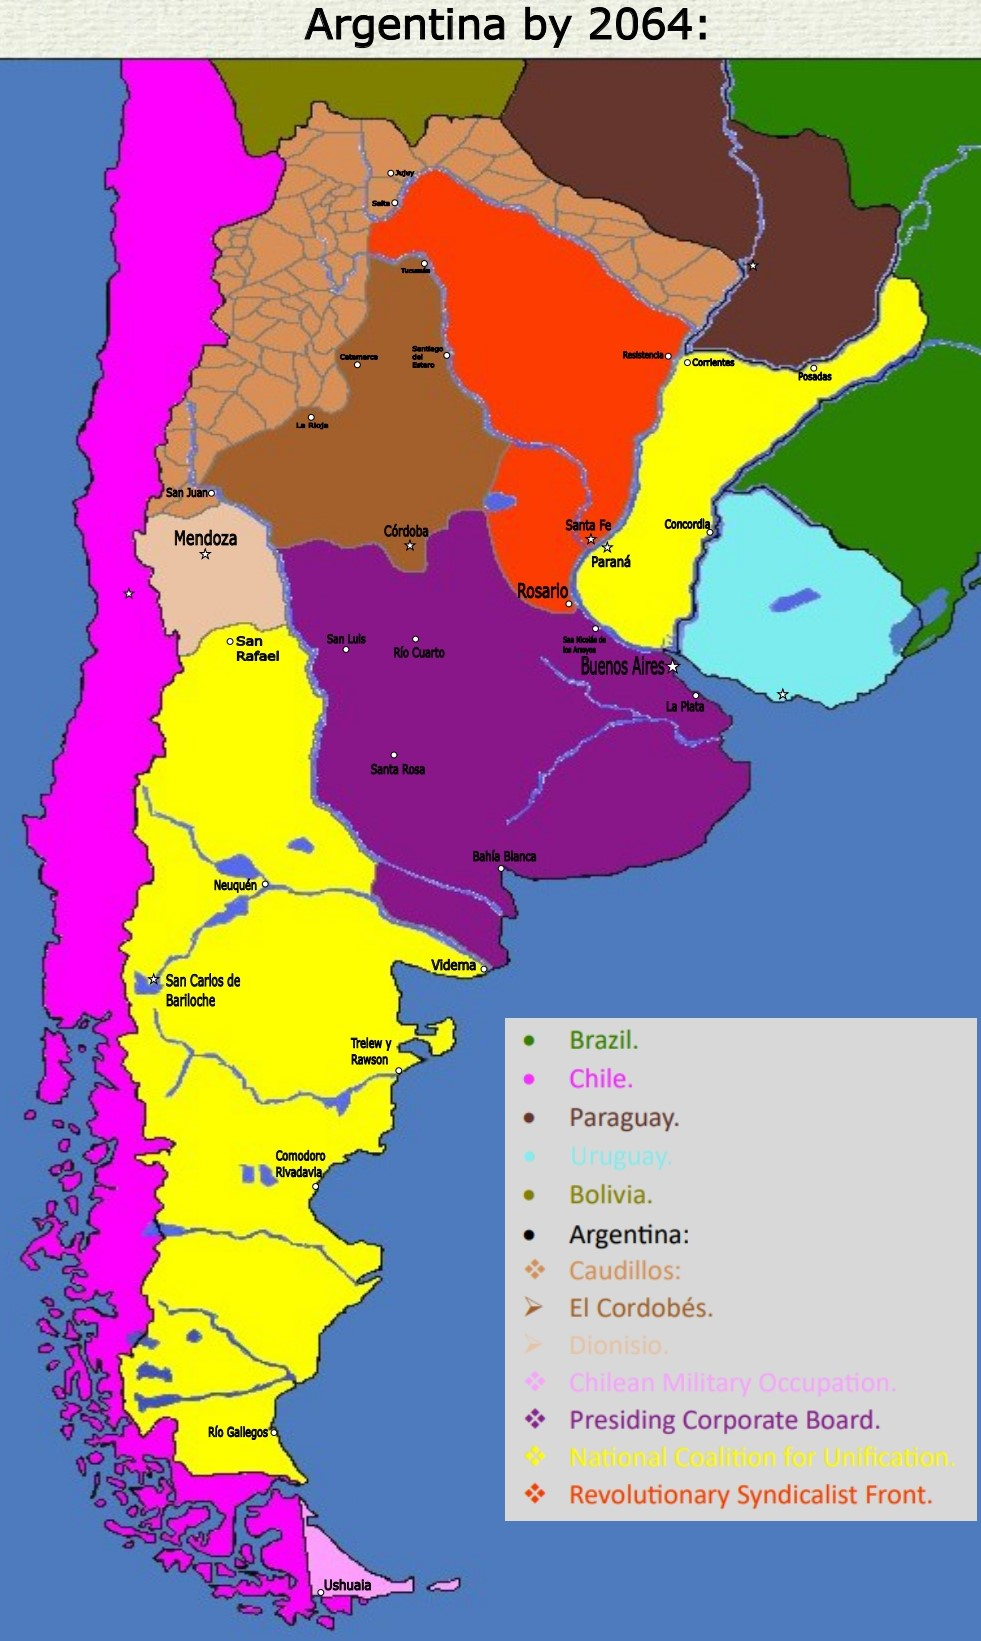 Map Argentina 2064 with legend latest upload_pages-to-jpg-0001 recortado.jpg